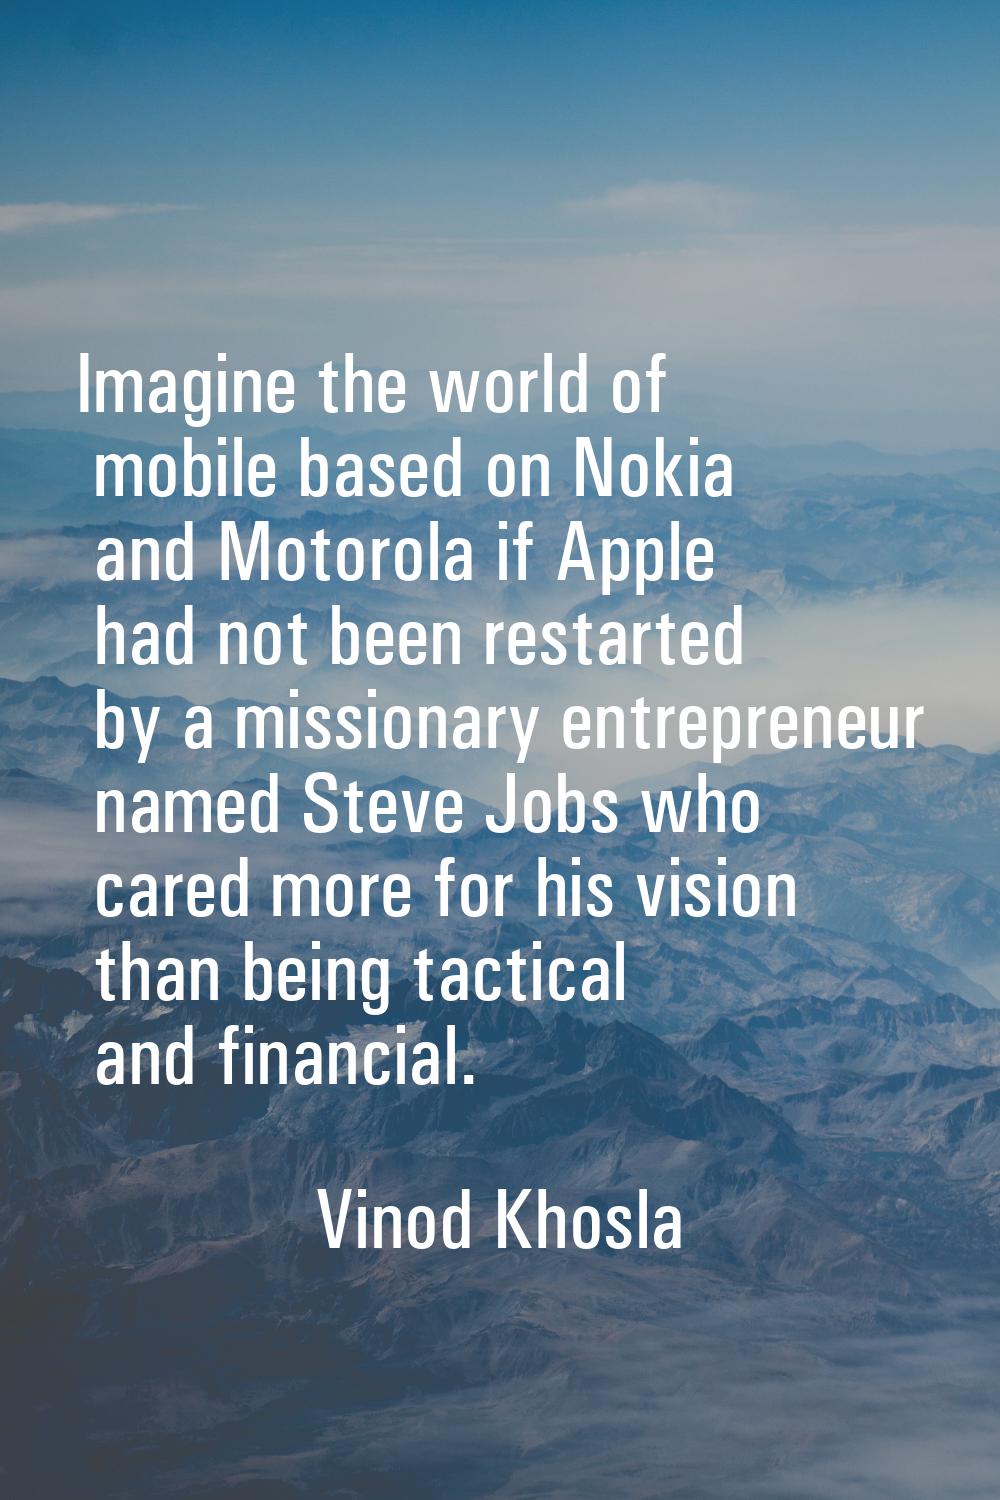 Imagine the world of mobile based on Nokia and Motorola if Apple had not been restarted by a missio